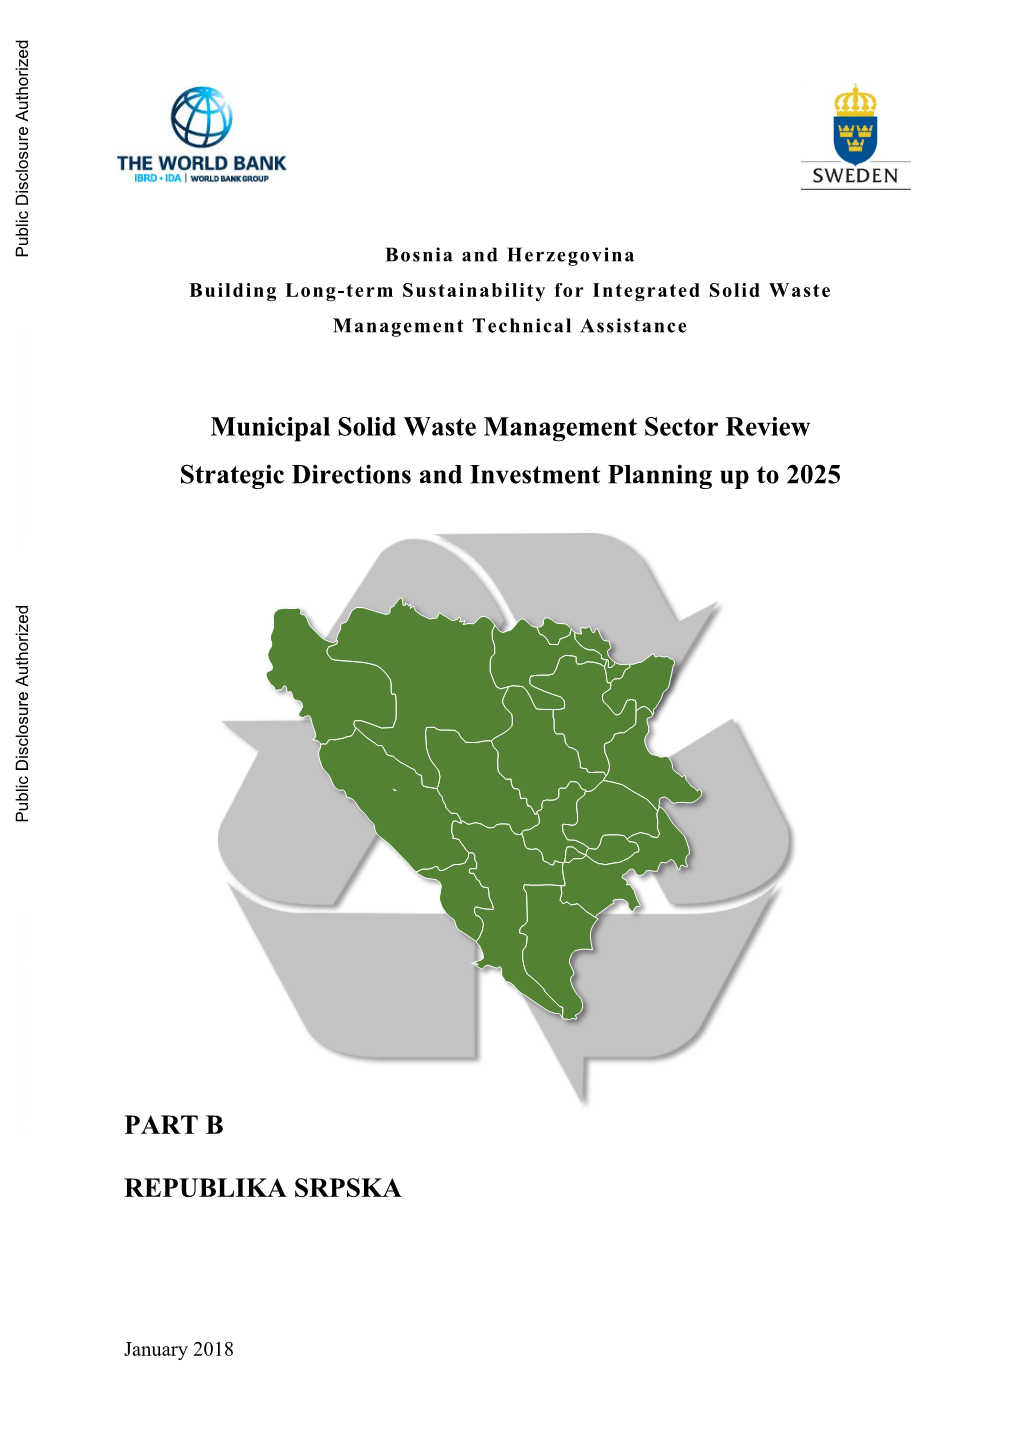 Municipal Solid Waste Management Sector Review Strategic Directions and Investment Planning up to 2025